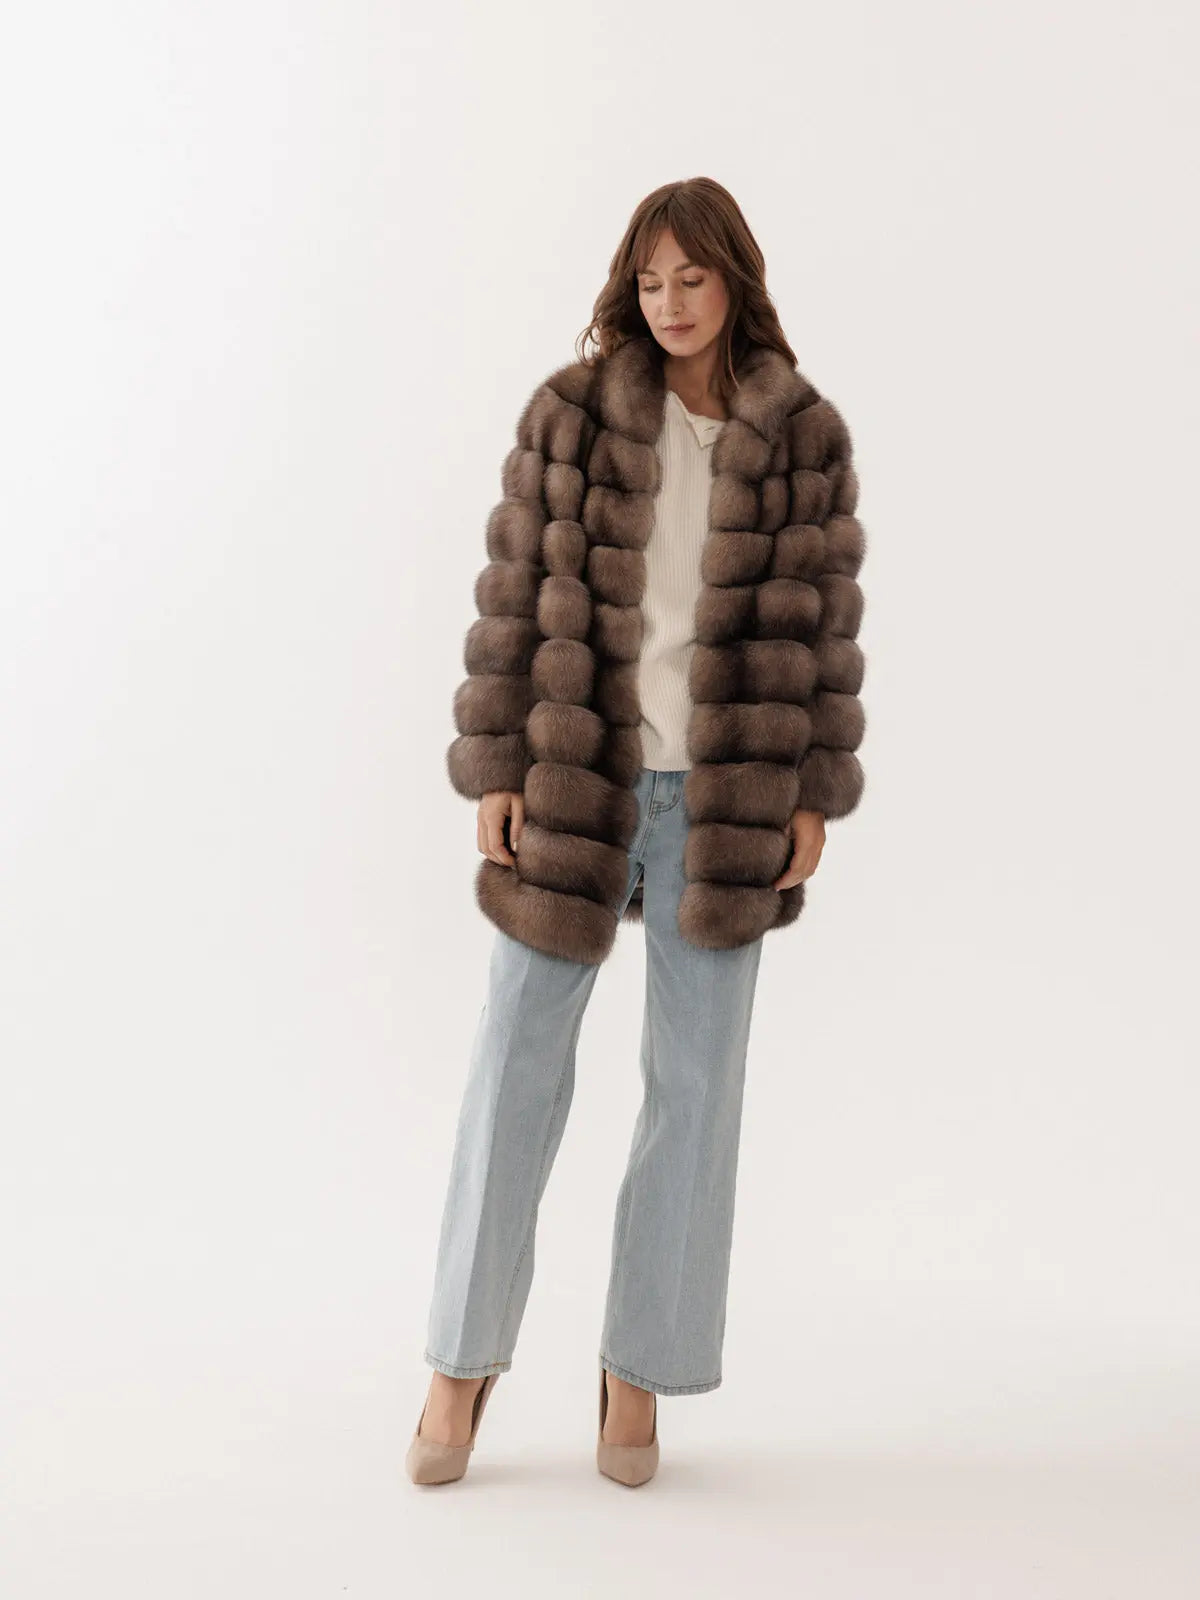 Sable coat with a stand-up collar in Desert Ice color